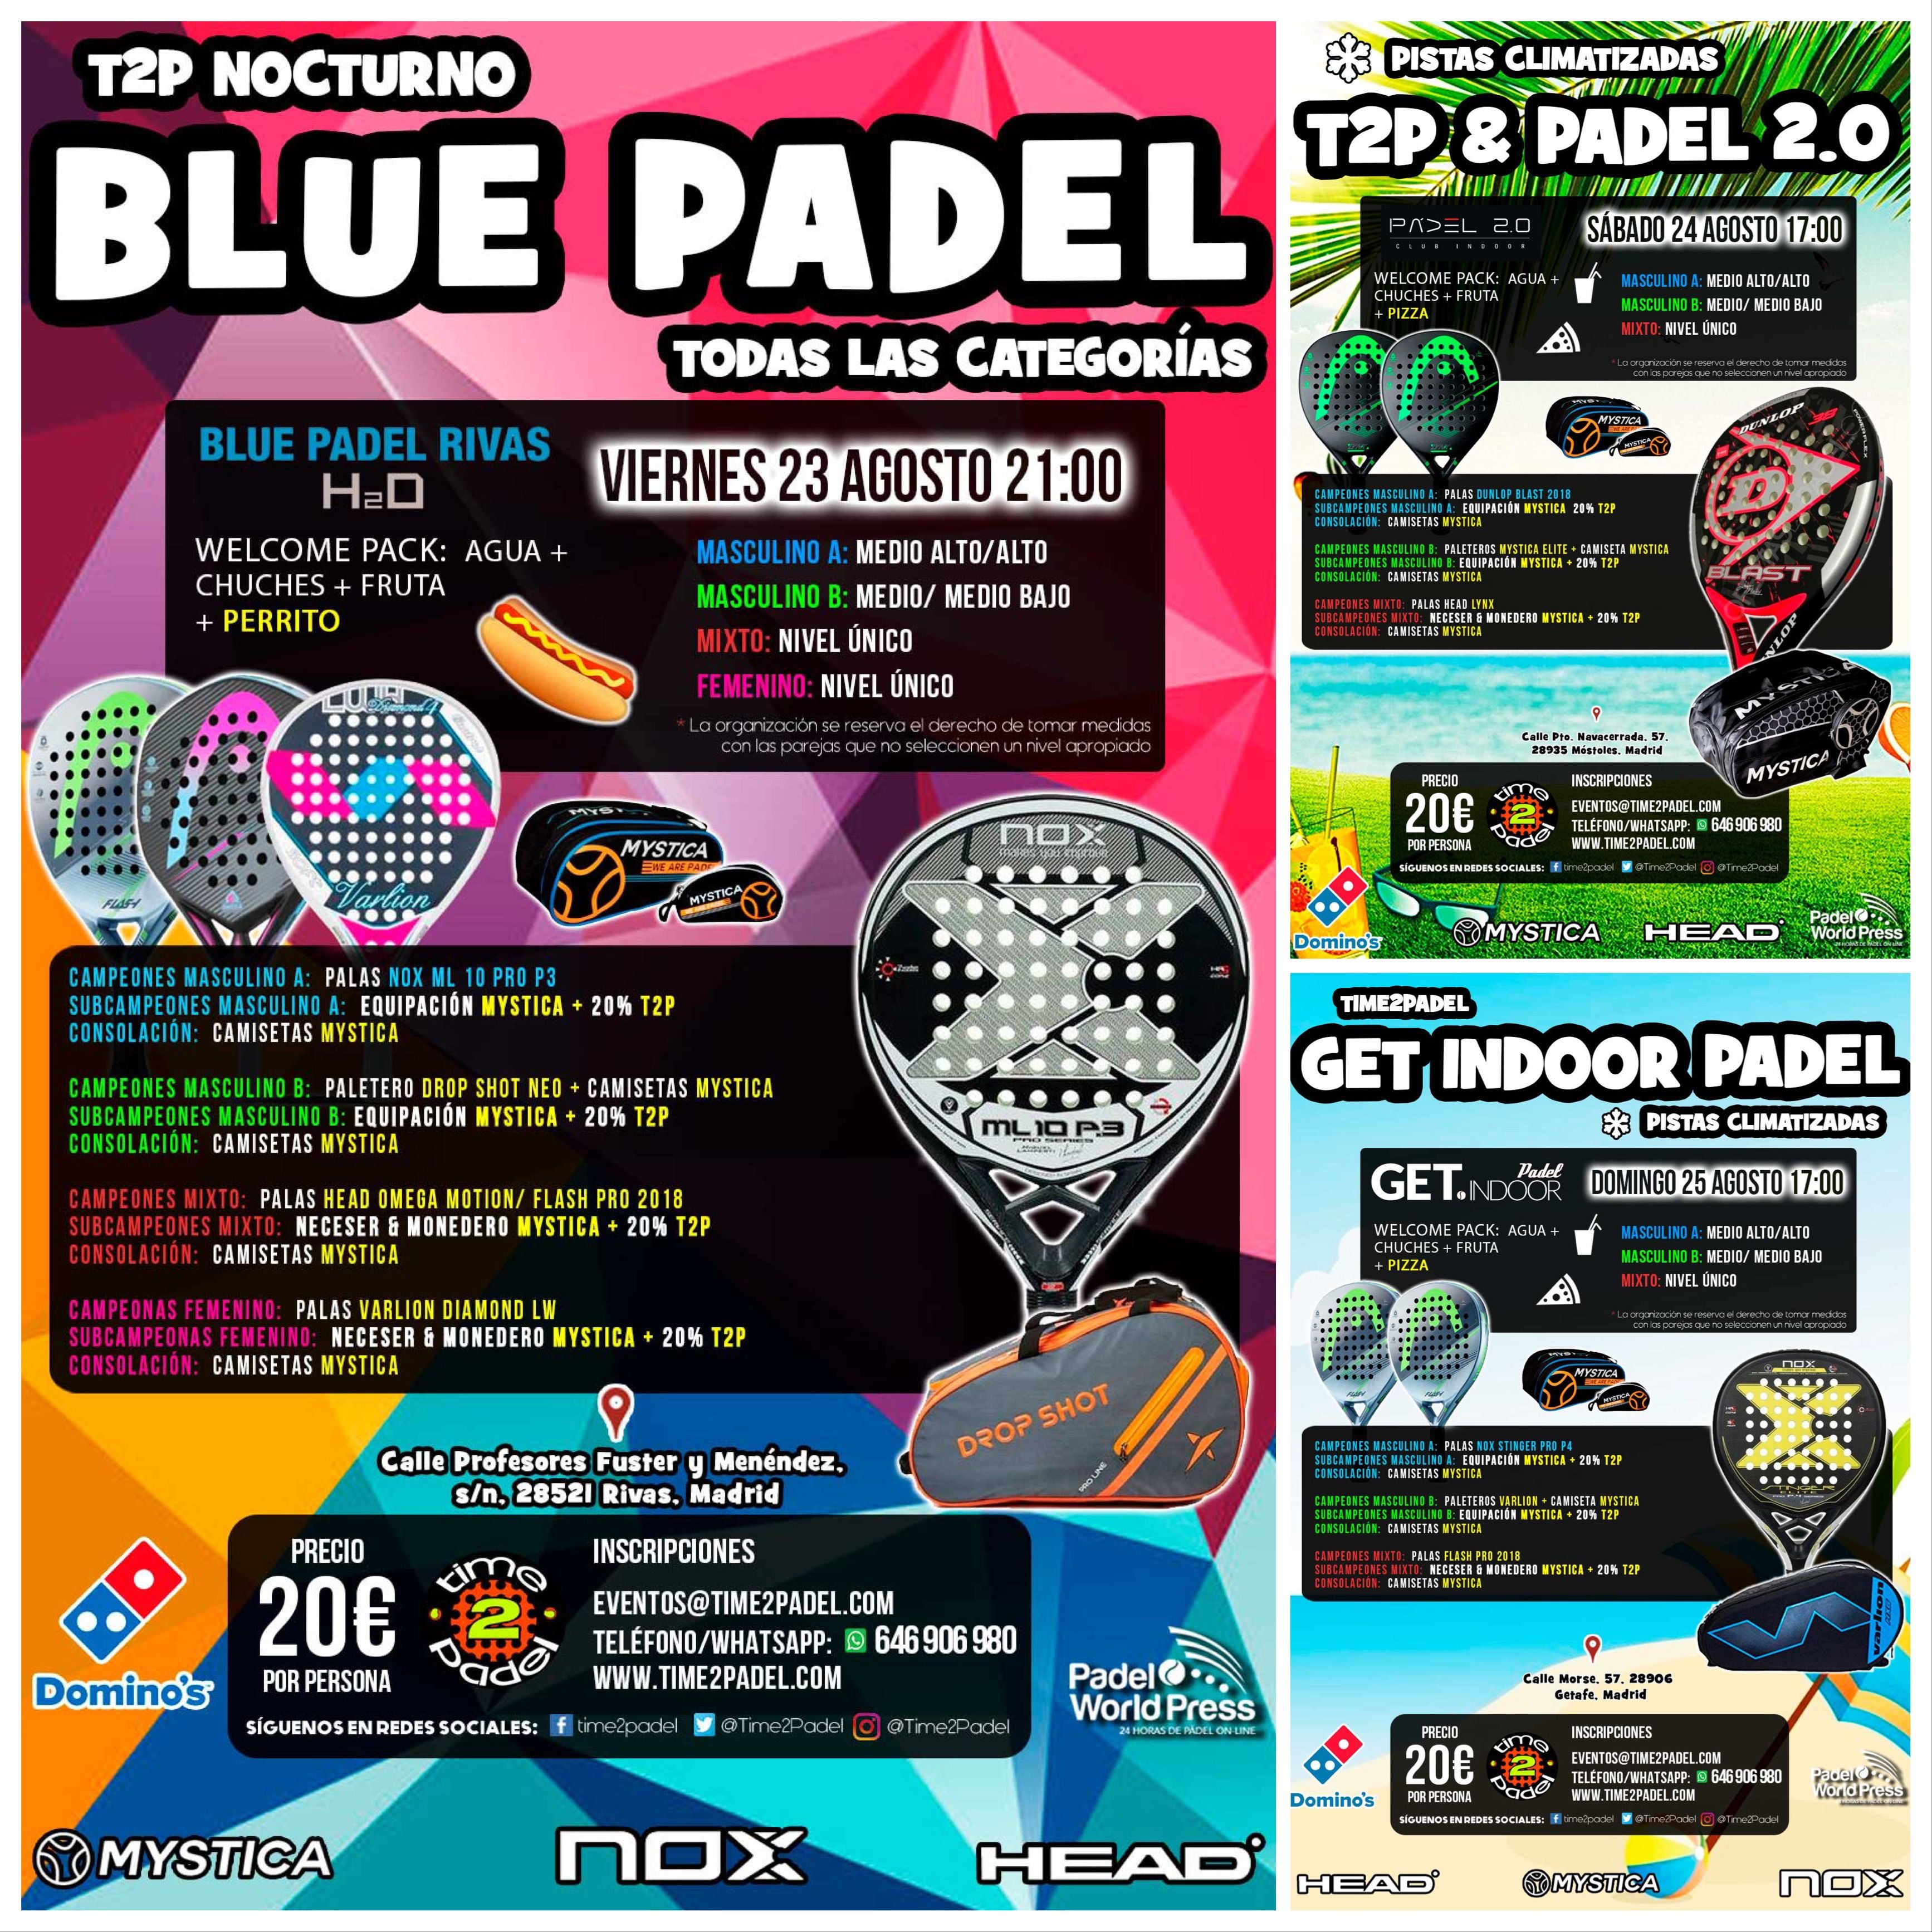 Start your holiday trip with Time2padel tournaments